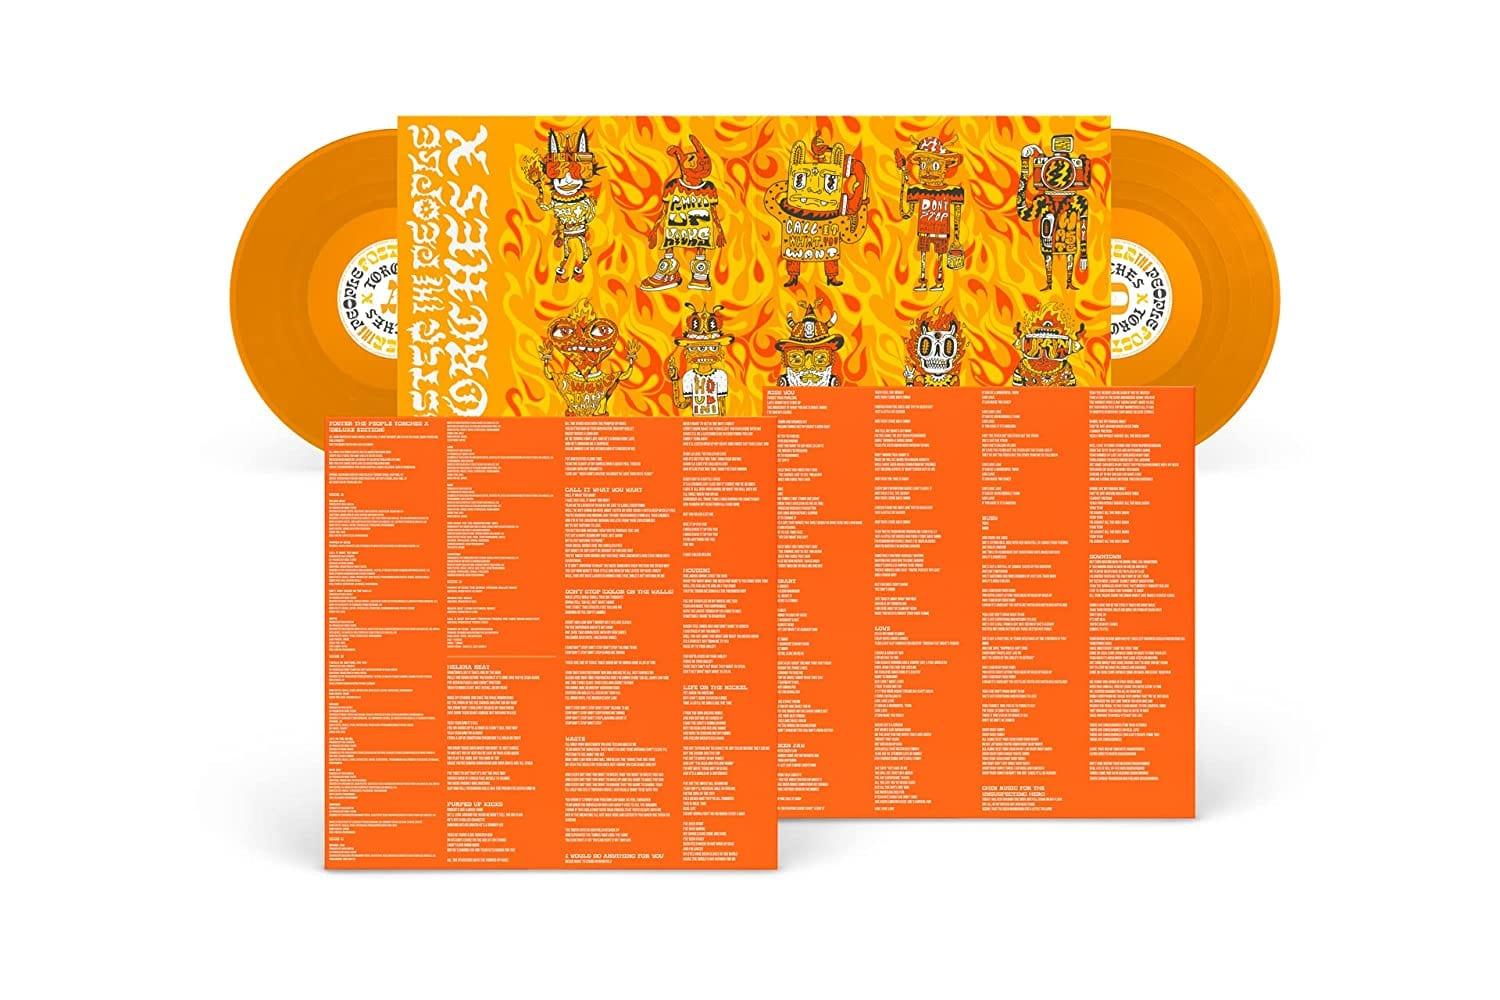 Foster The People - Torches X (Limited, Deluxe Edition, Gatefold, Orange Vinyl) (2 LP) - Joco Records